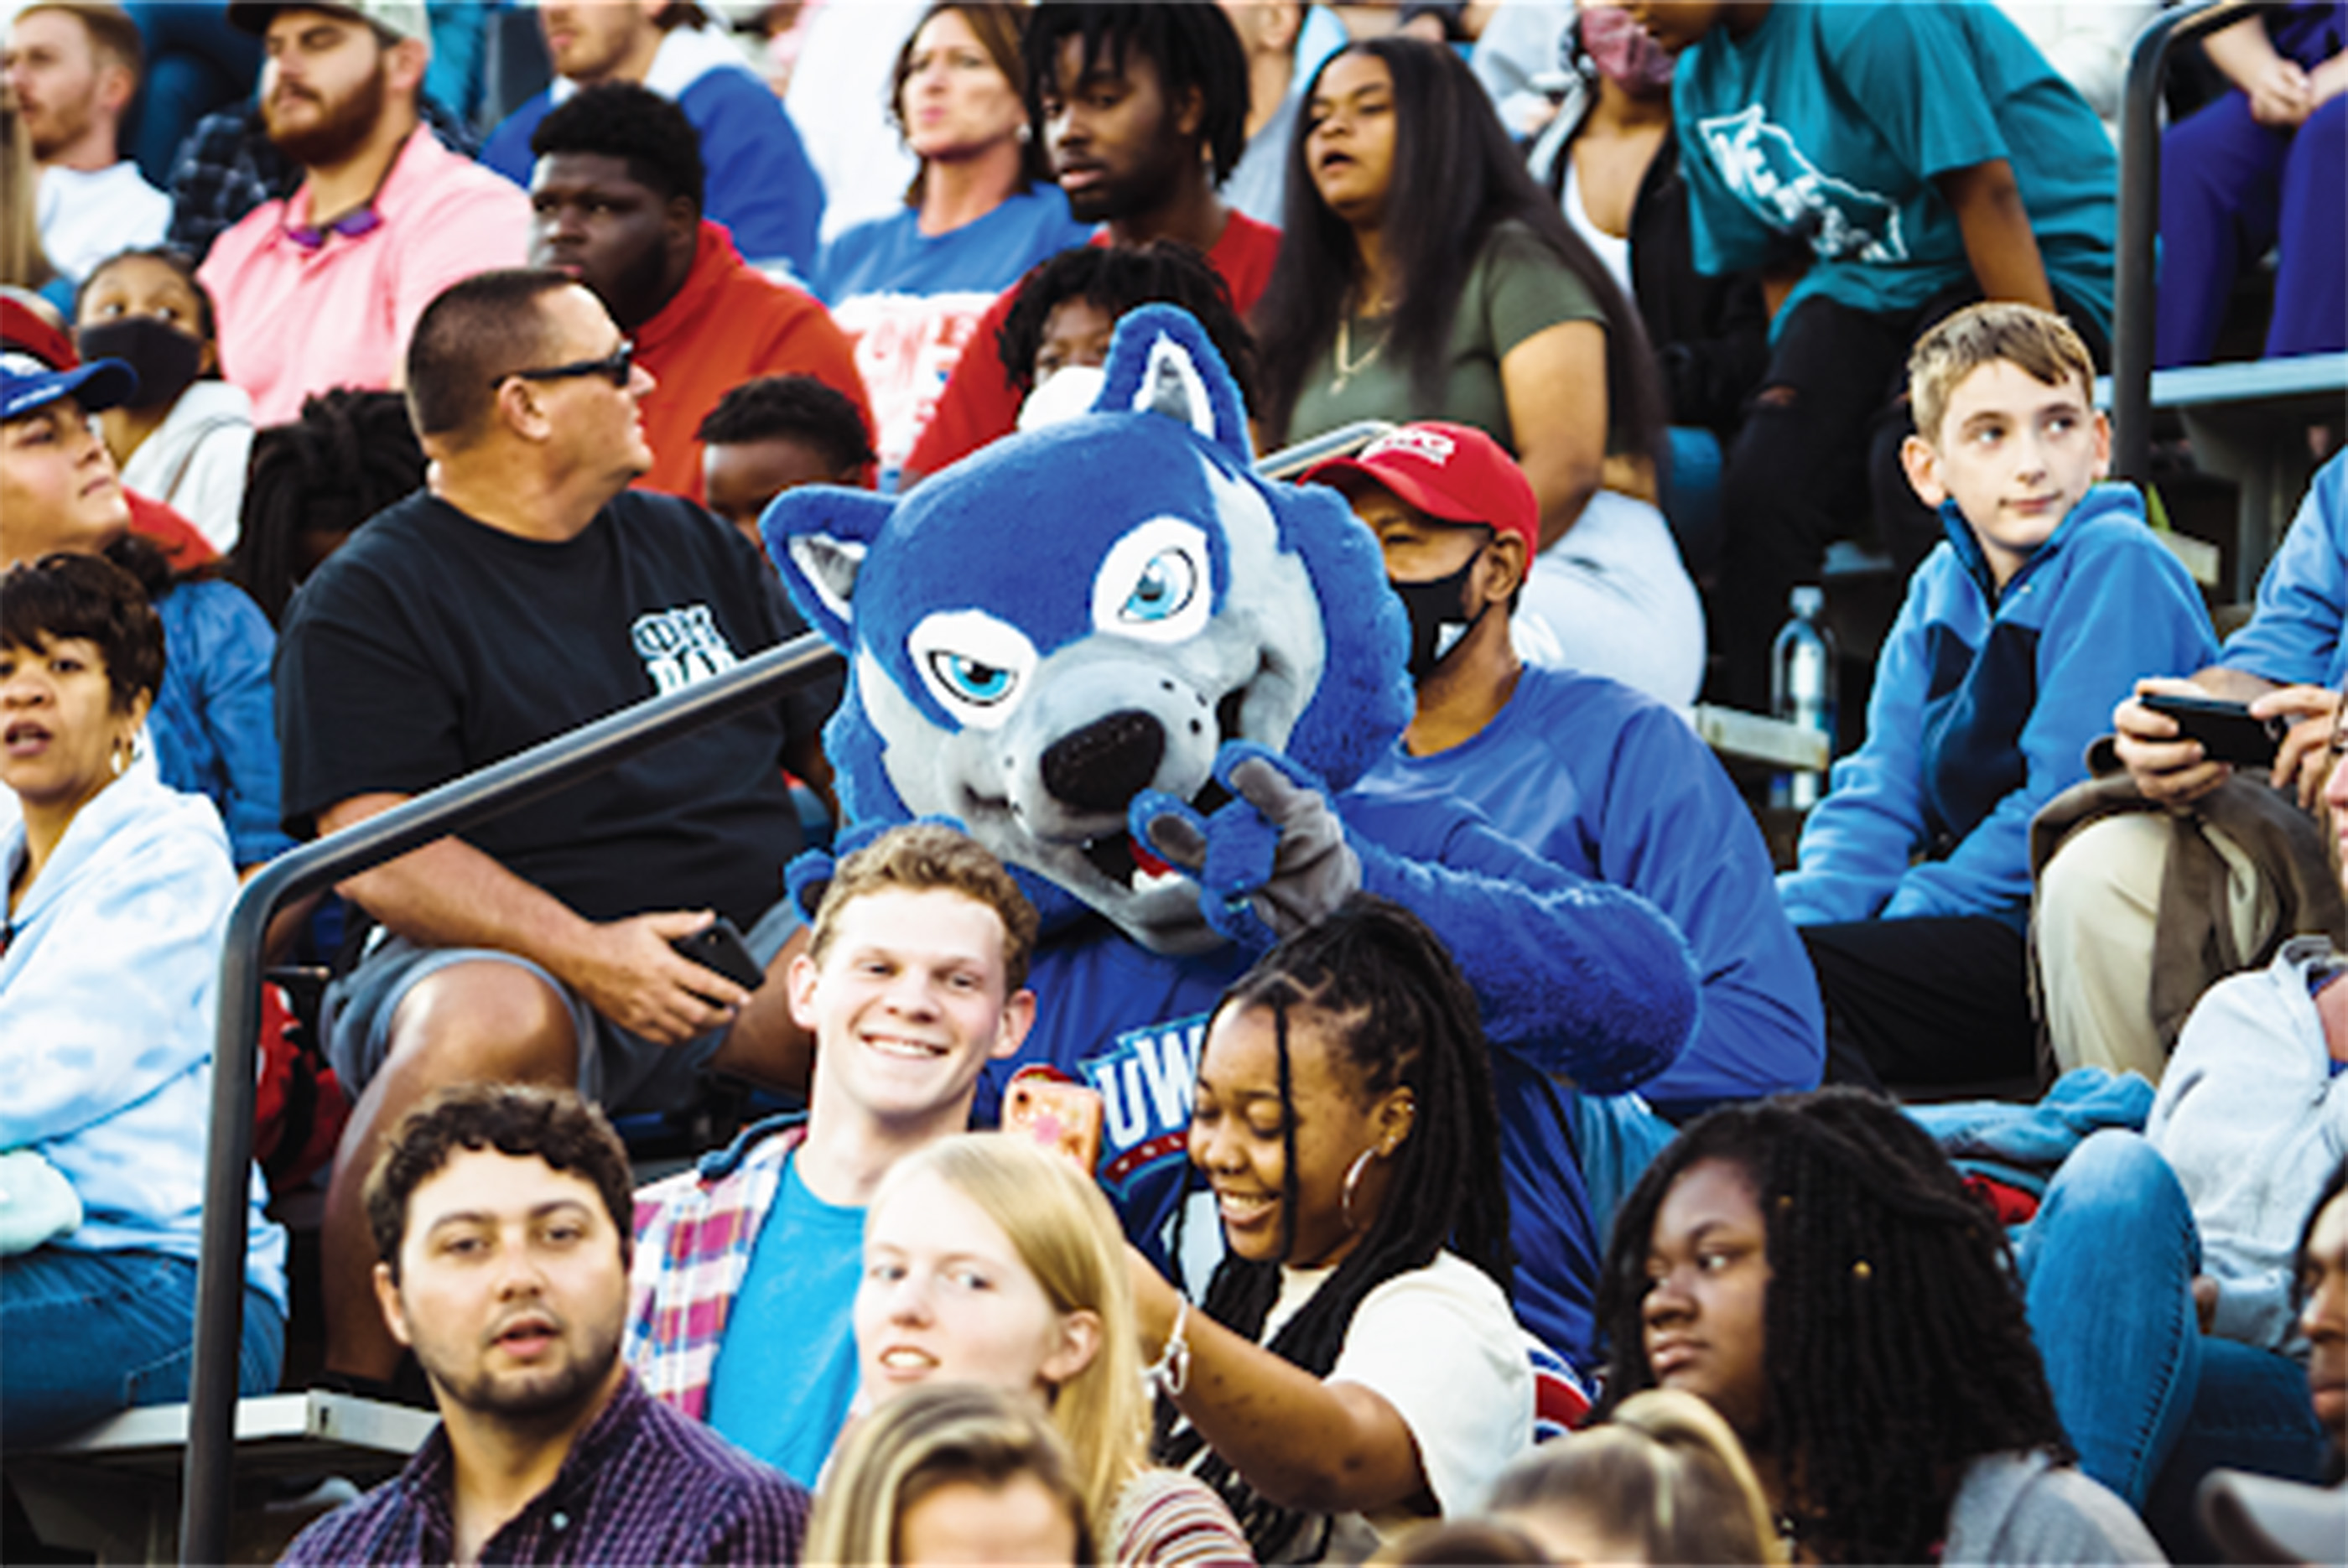 wolfie in a crowd with students and parents and friends at the stadium